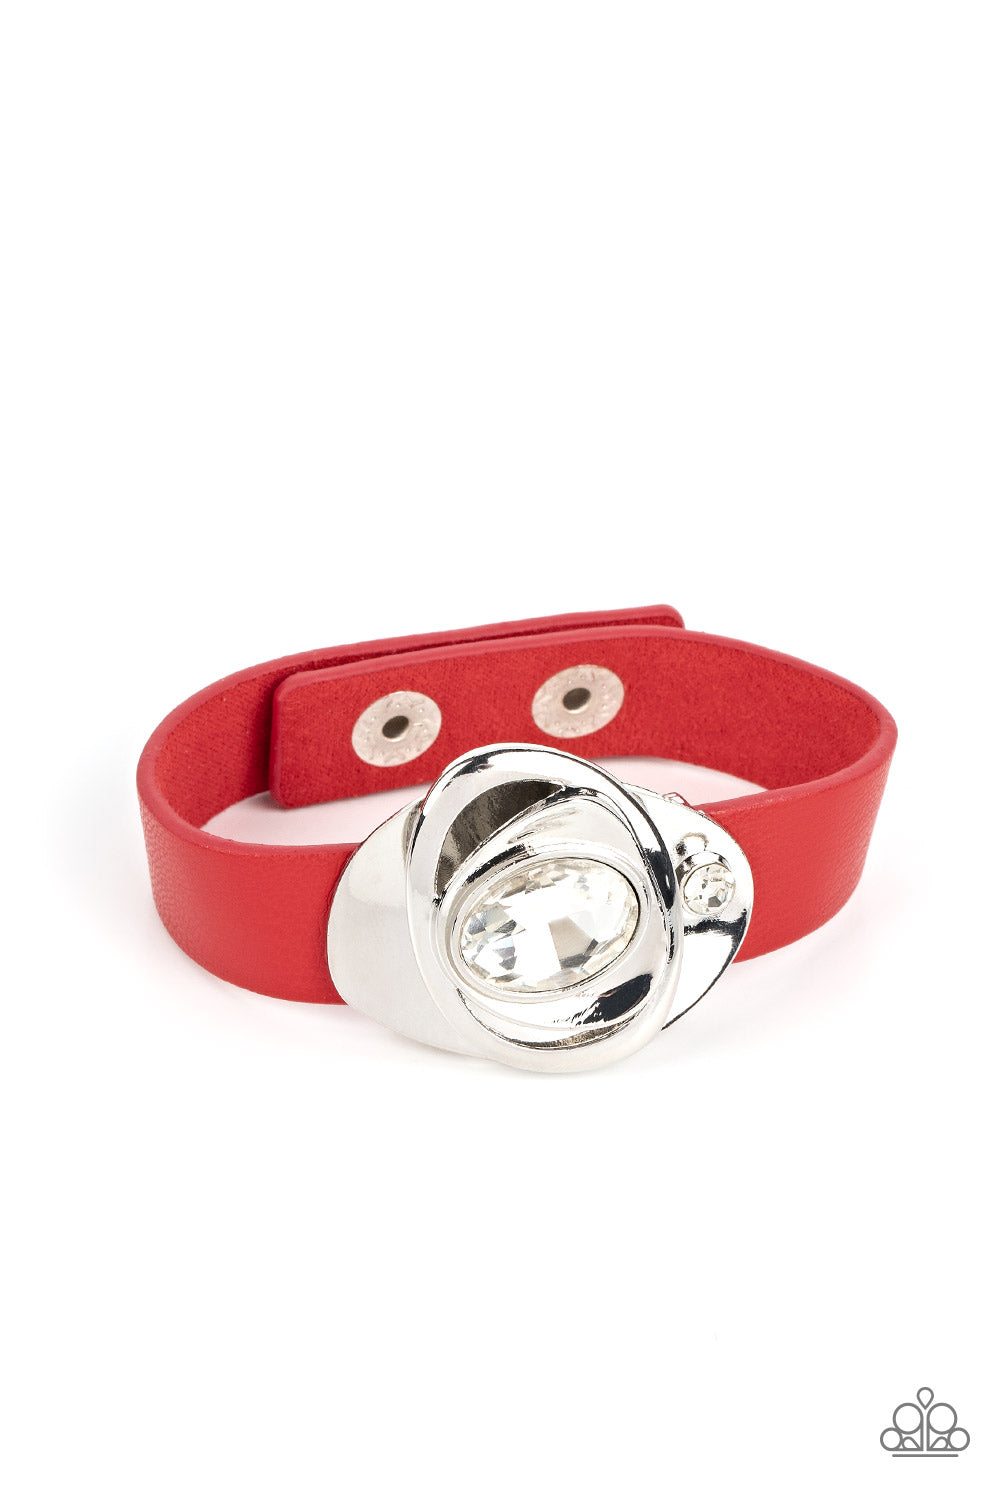 Paparazzi Accessories - Pasadena Prairies - Red Leather Bracelets embellished with an oversized white oval gem, asymmetrical silver frames haphazardly stack into an abstract floral-inspired centerpiece. A smaller white rhinestone attaches the metallic structure to a band of red leather that wraps around the wrist in a flirty finish. Features an adjustable snap closure.  Sold as one individual bracelet.